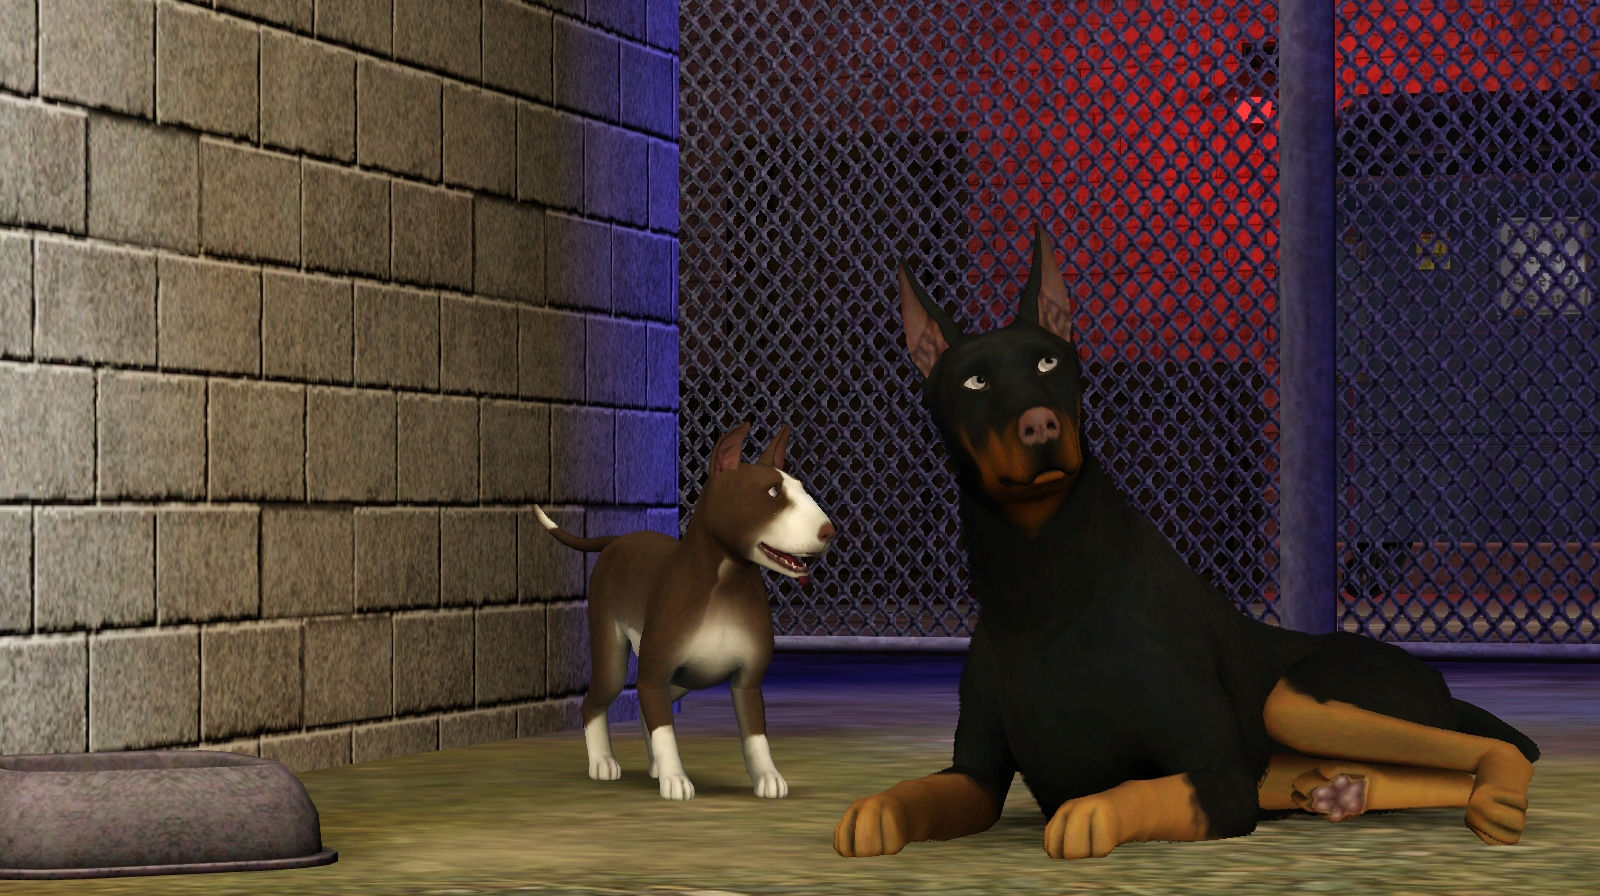 3 animals dogs. SIMS 3 петс. The SIMS 3 питомцы. DLC питомцы SIMS 3. SIMS 3: Pets [питомцы].